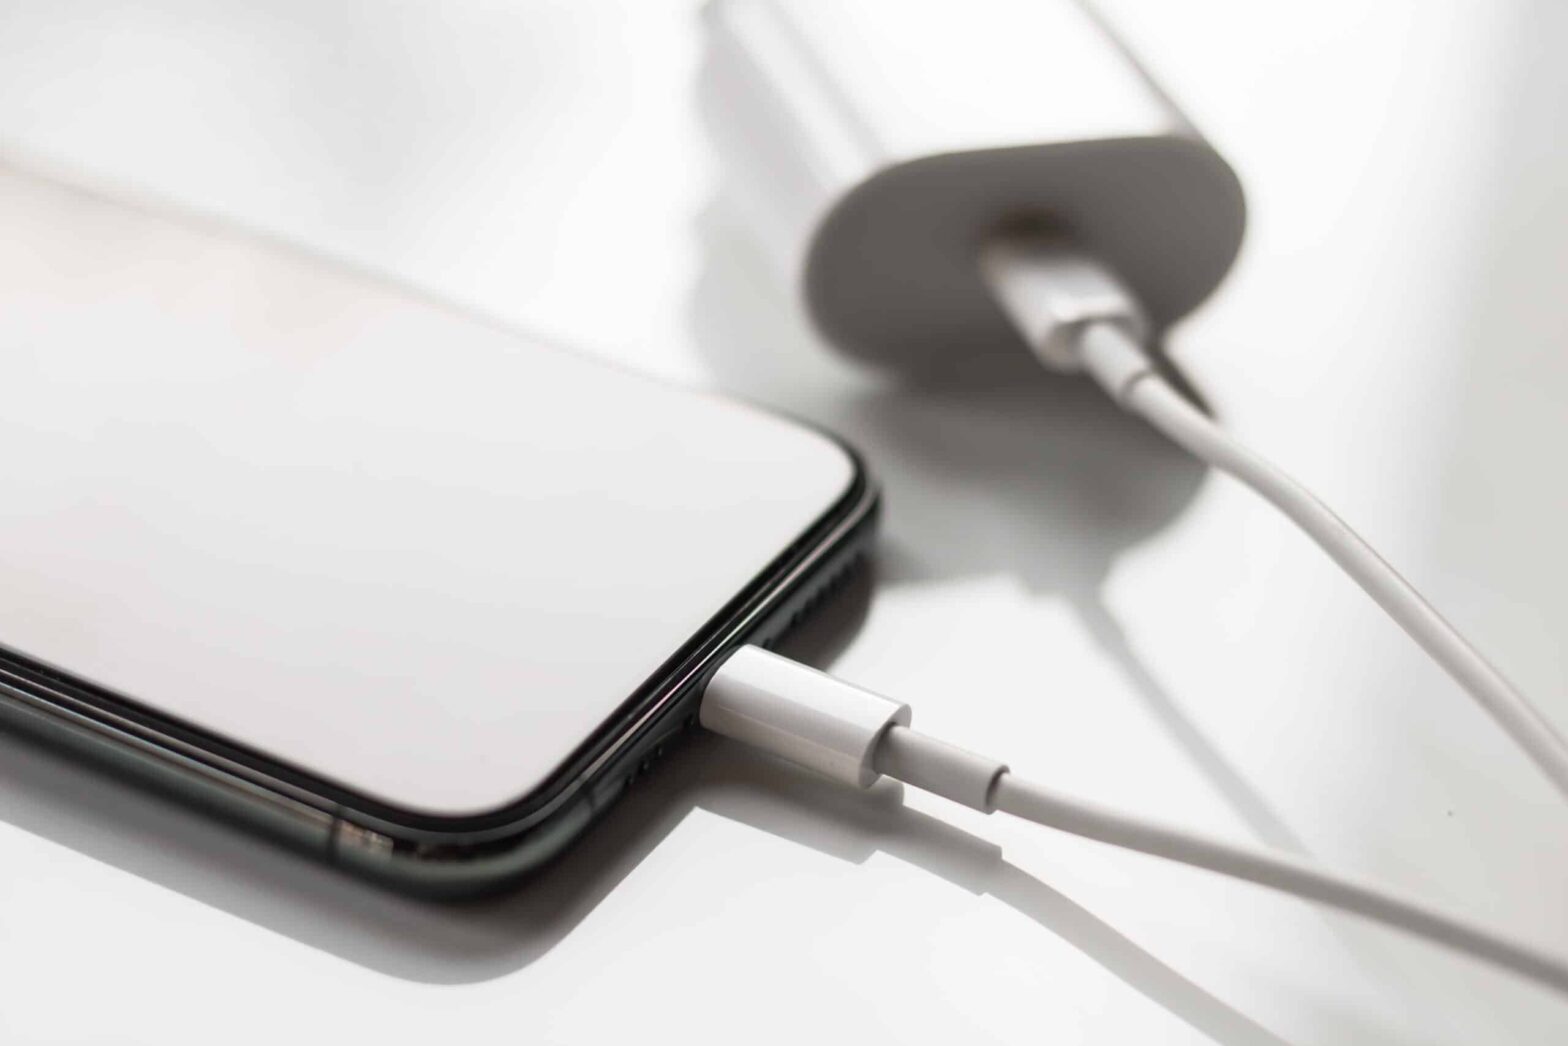 brazil’s-department-of-justice-apprehended-hundreds-of-iphones-sold-without-a-charger,-after-decision-in-september-to-ban-sells-in-the-country-until-apple-includes-item-back-in-the-box